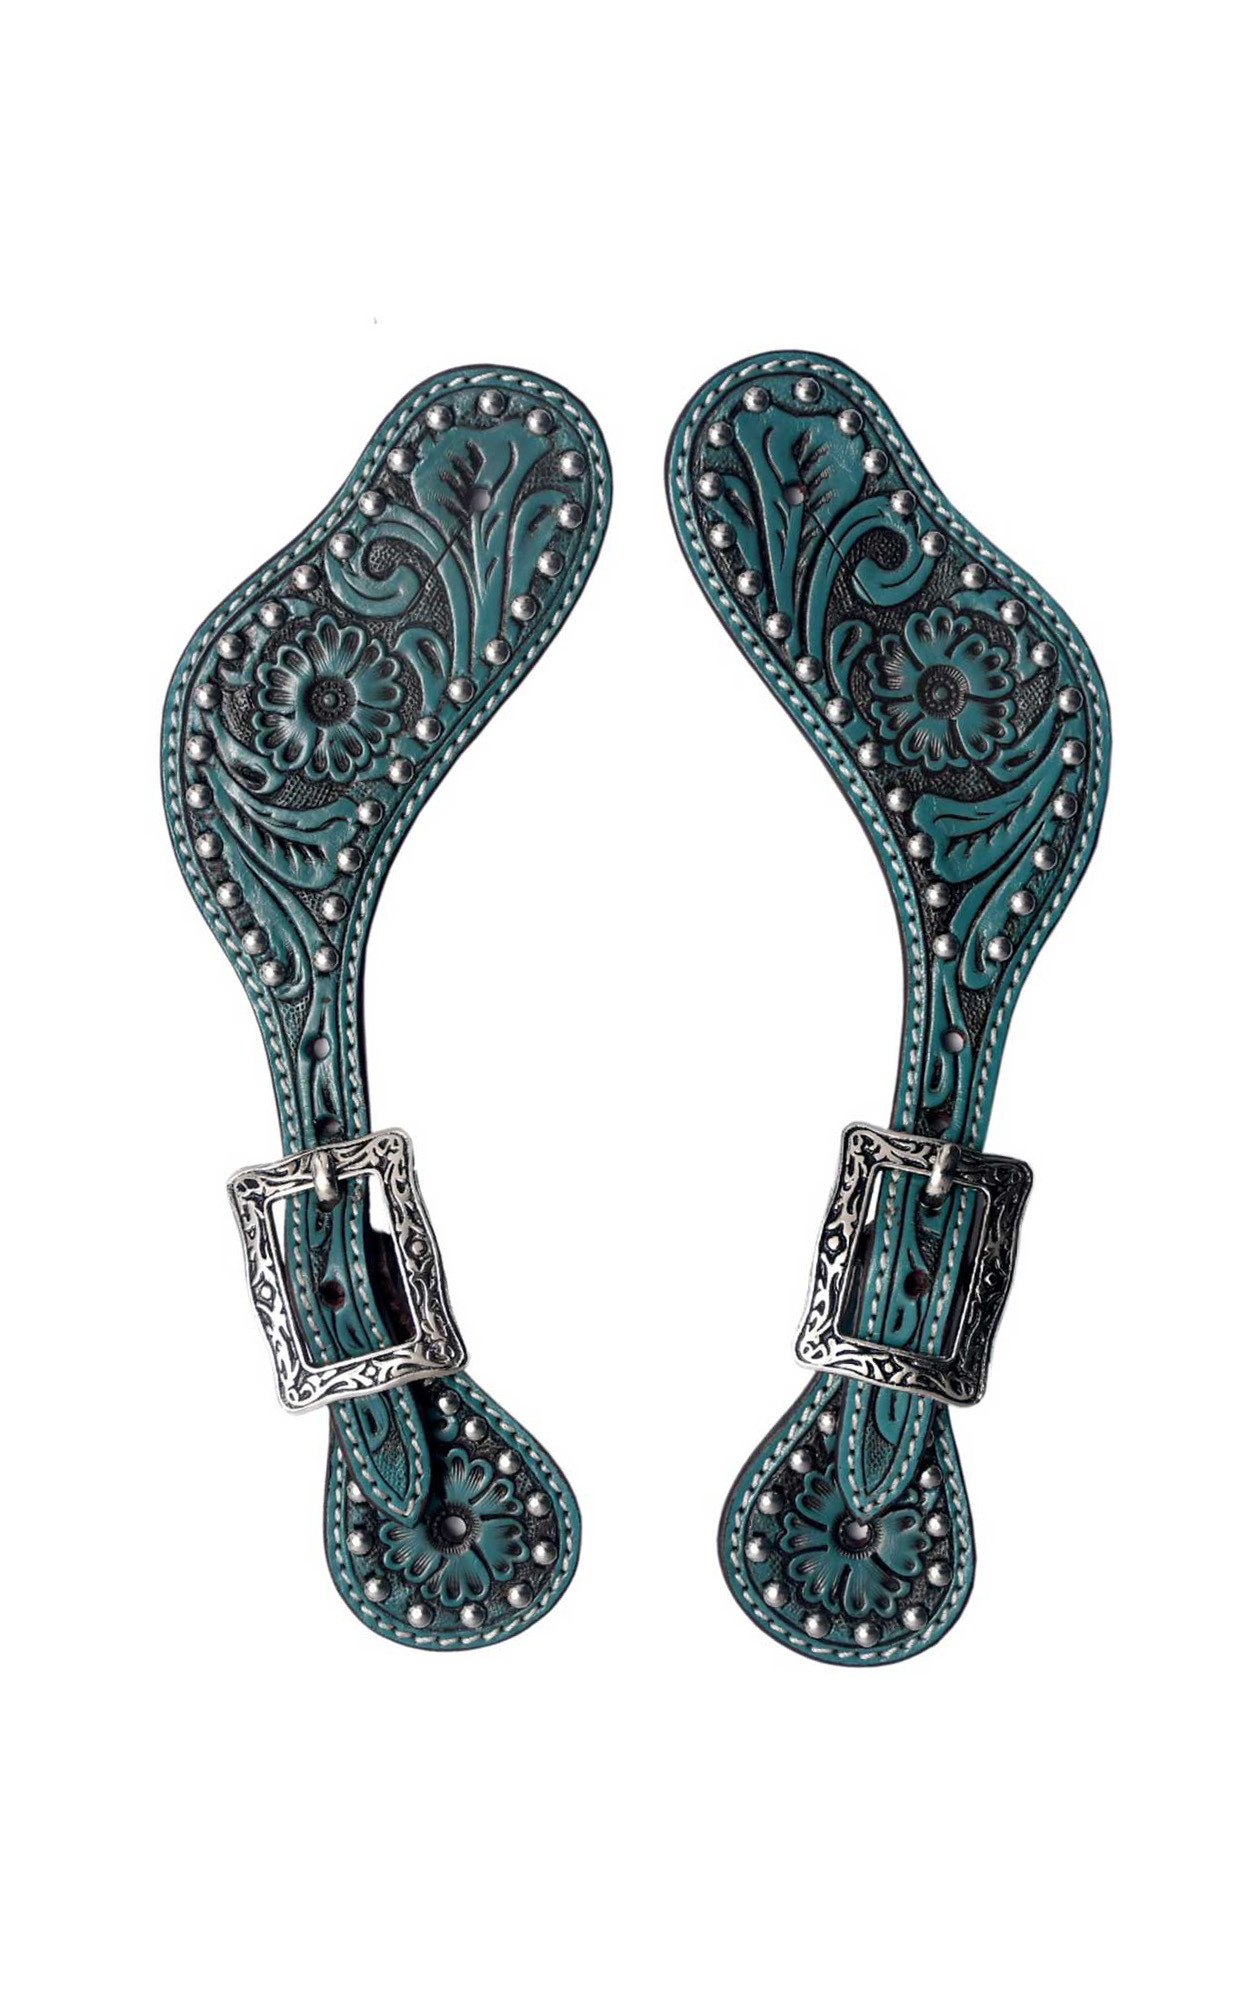 BLACK HOOF | Pink | Turquoise | Floral Tooled Leather Spur Straps with silver spots for Horse Riders | Western Men, Women, Adjustable Single Ply Spur Straps | Equestrian Accessories